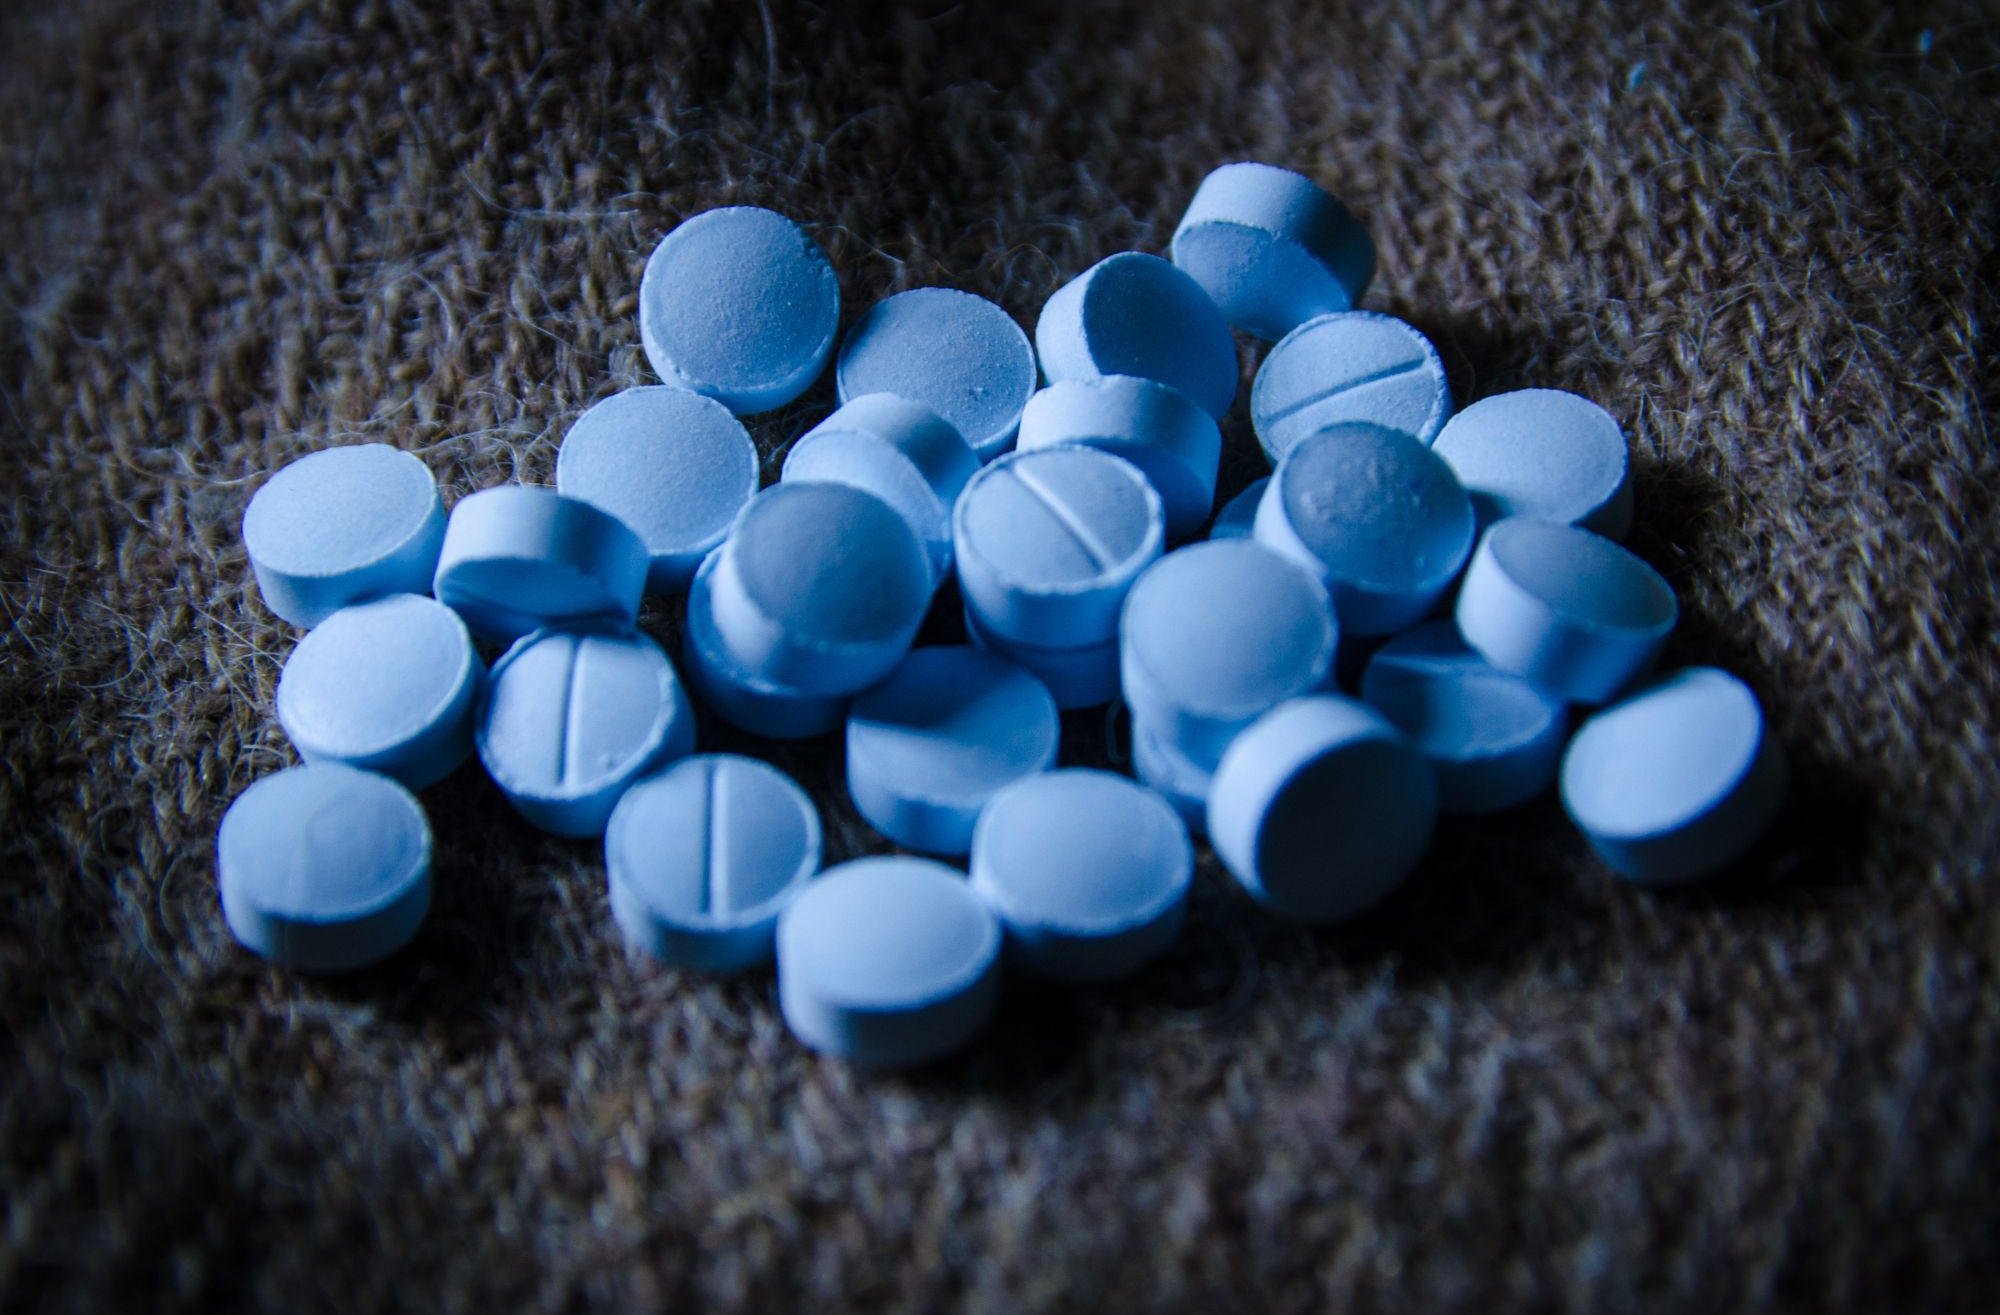 Doctors Have Discovered the Safest Way To Take Valium and Ativan